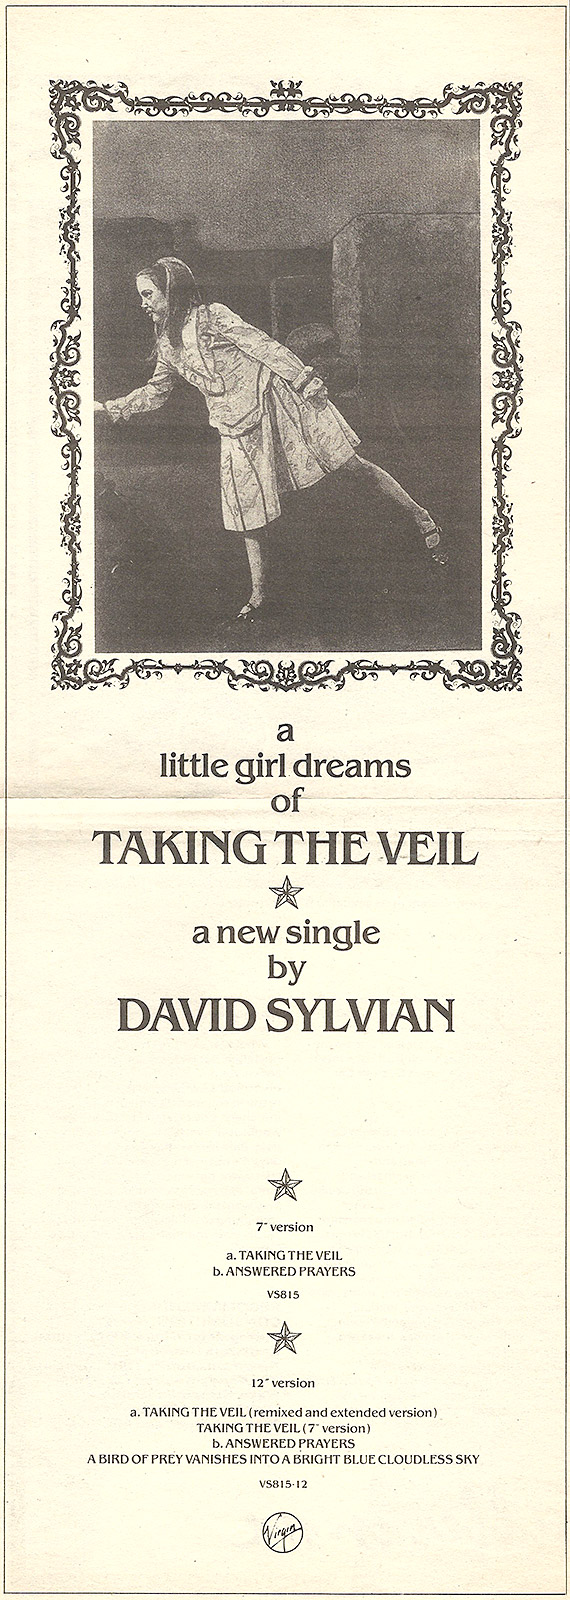 Ad in NME 2nd August 1986 for Taking The Veil